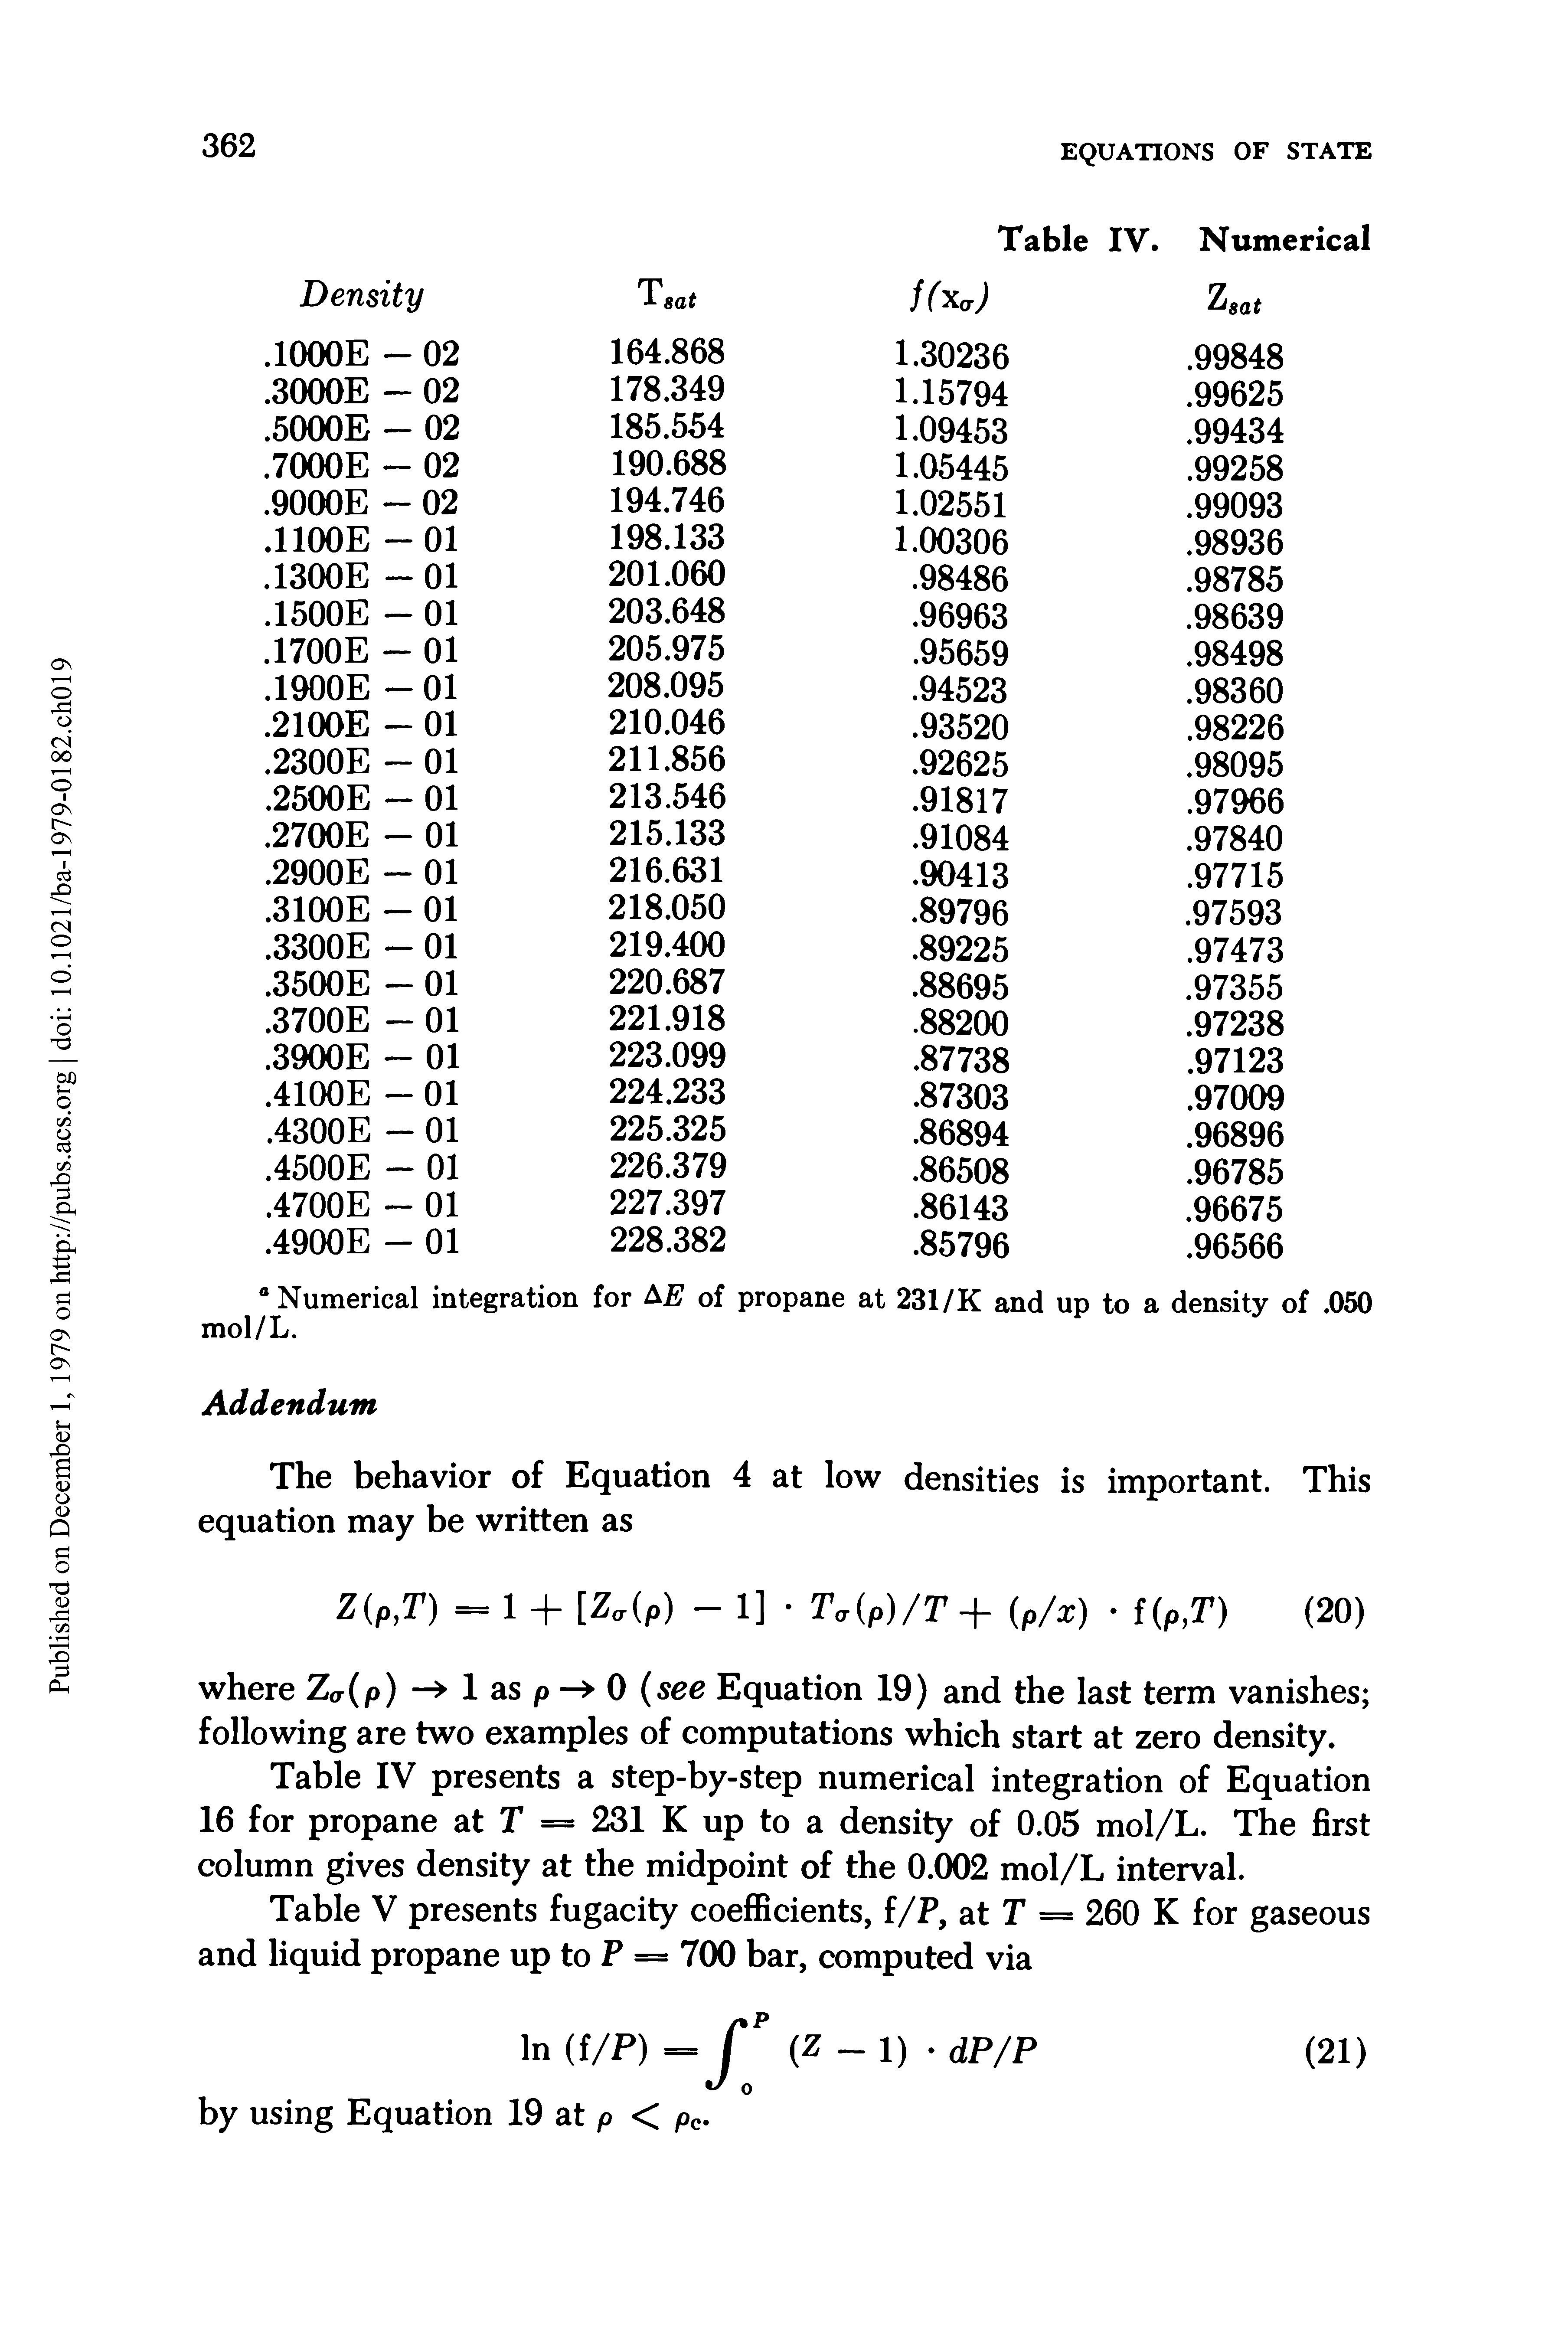 Table V presents fugacity coefficients, f/P, at T = 260 K for gaseous and liquid propane up to P = 700 bar, computed via...